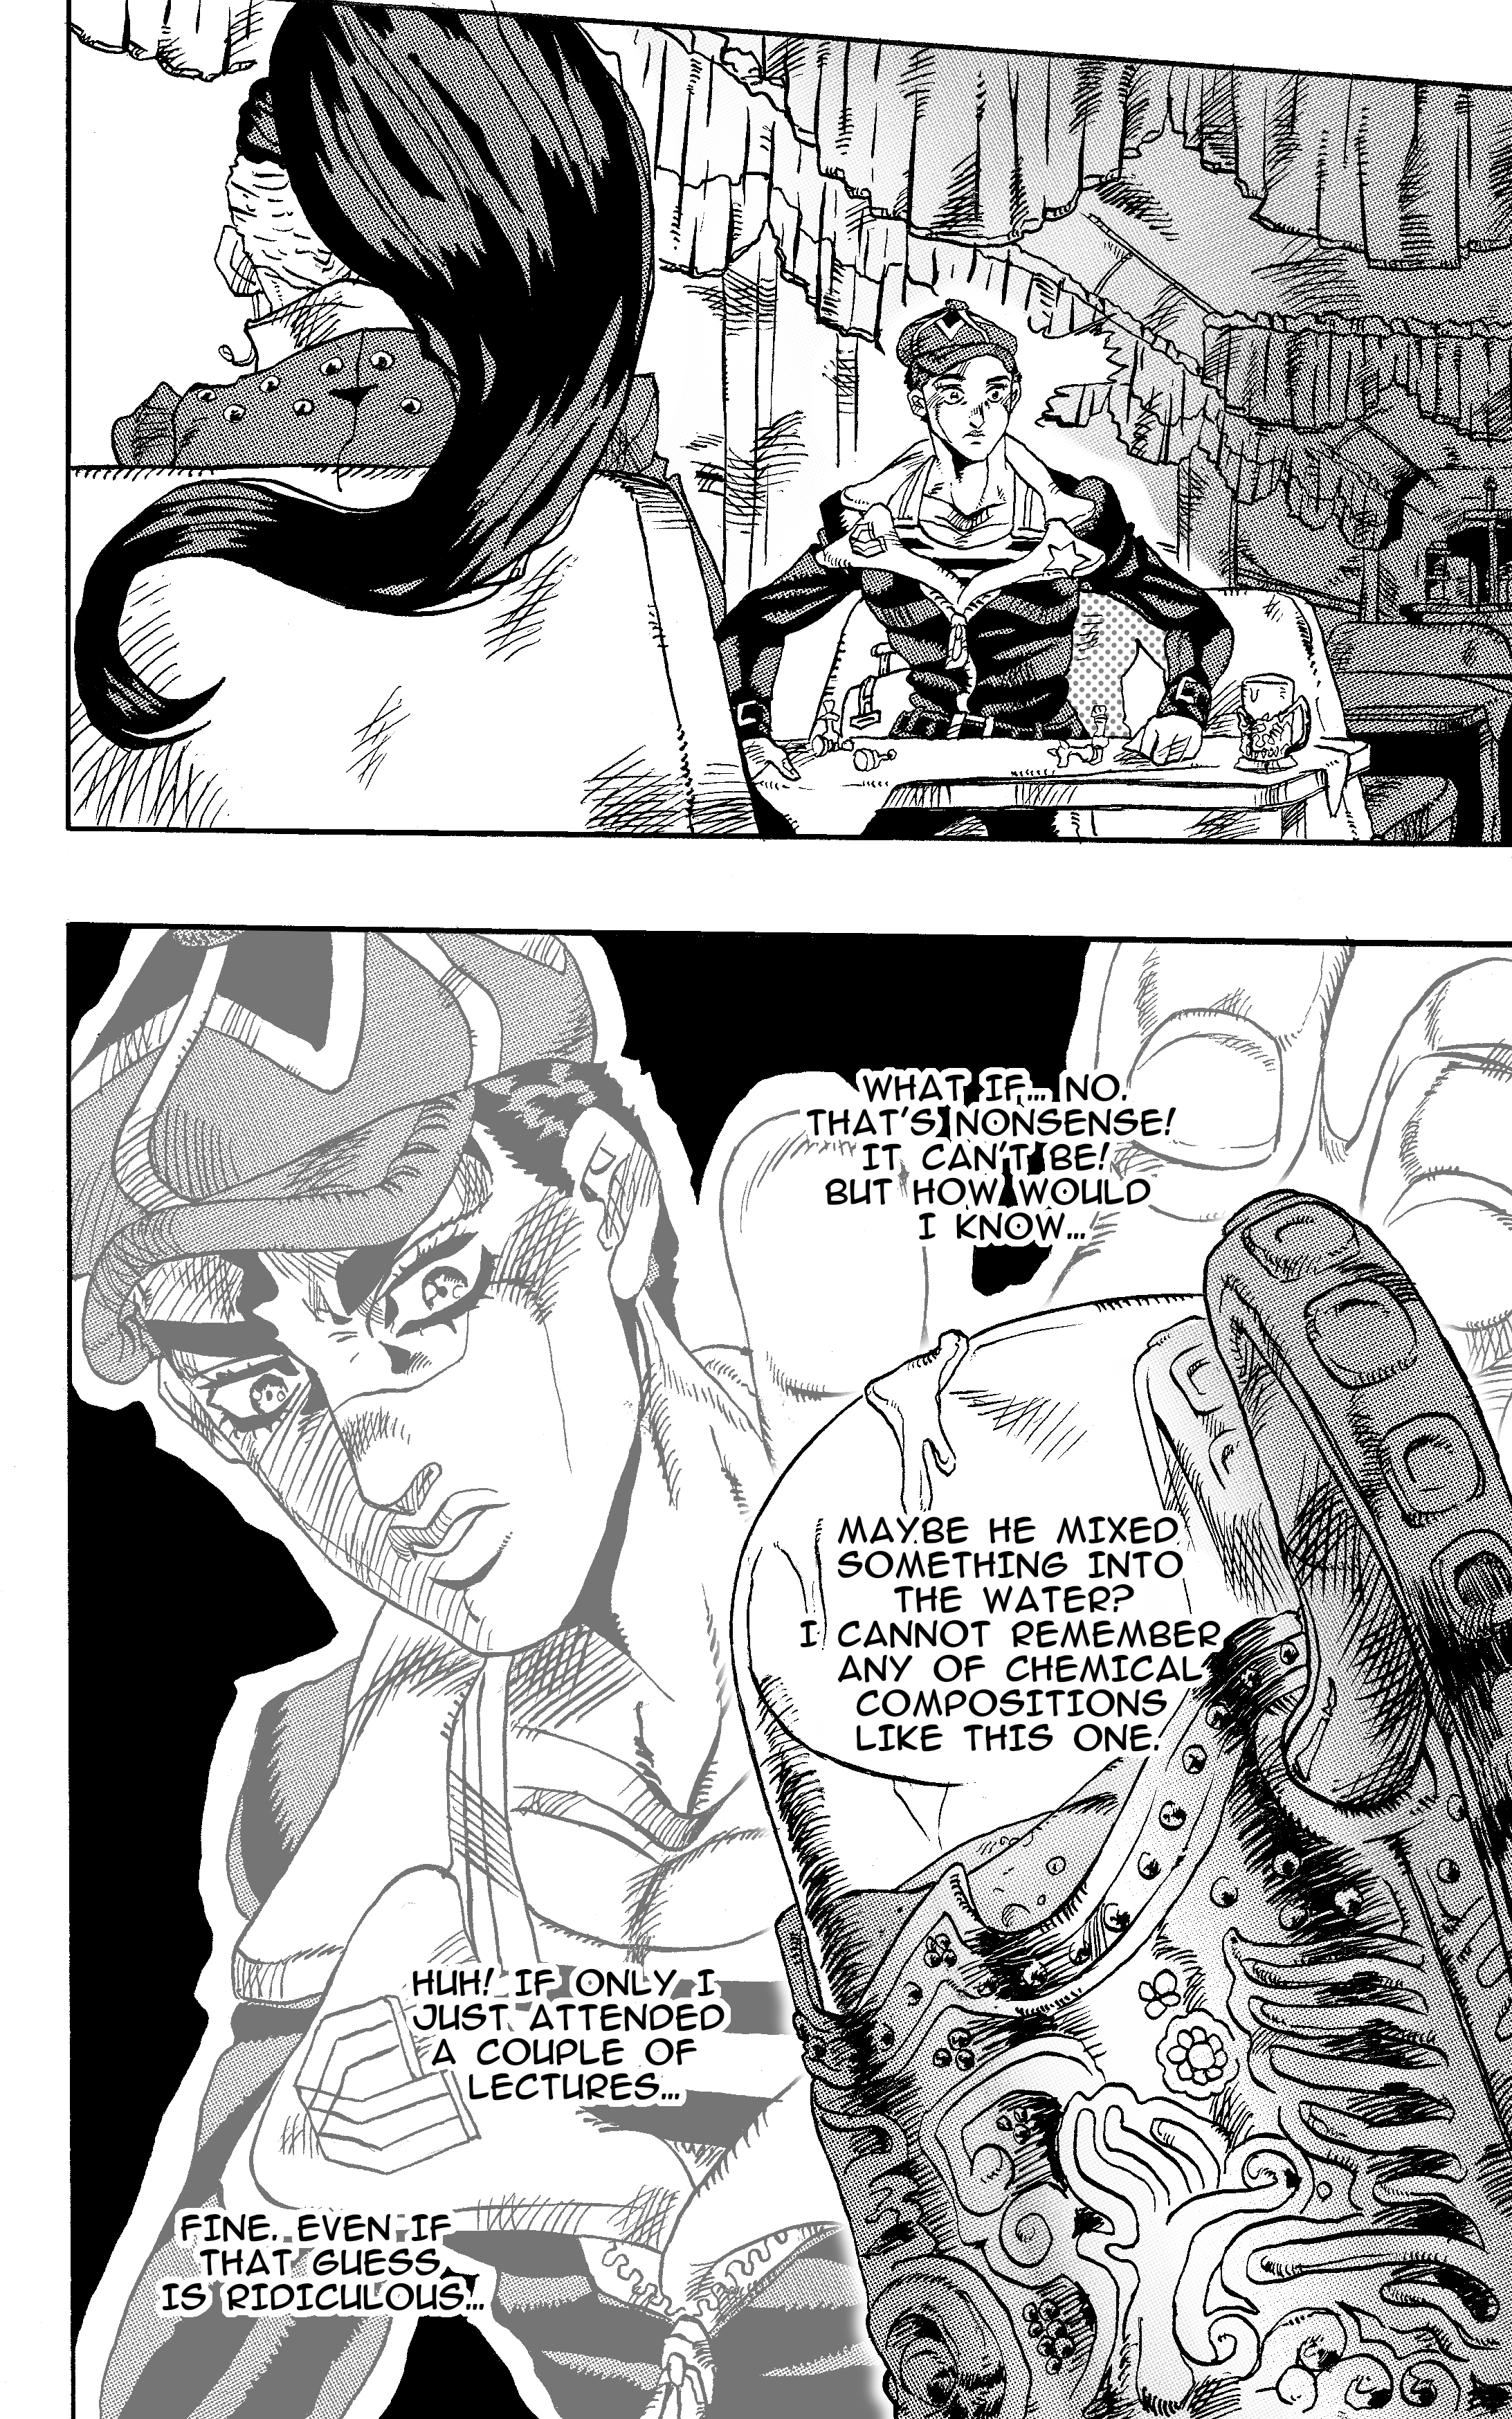 Jojo's Bizarre Adventure: Moscow Calling (Doujinshi) Vol.1 Chapter 7: This Train Is On Fire Part 2 - Picture 3